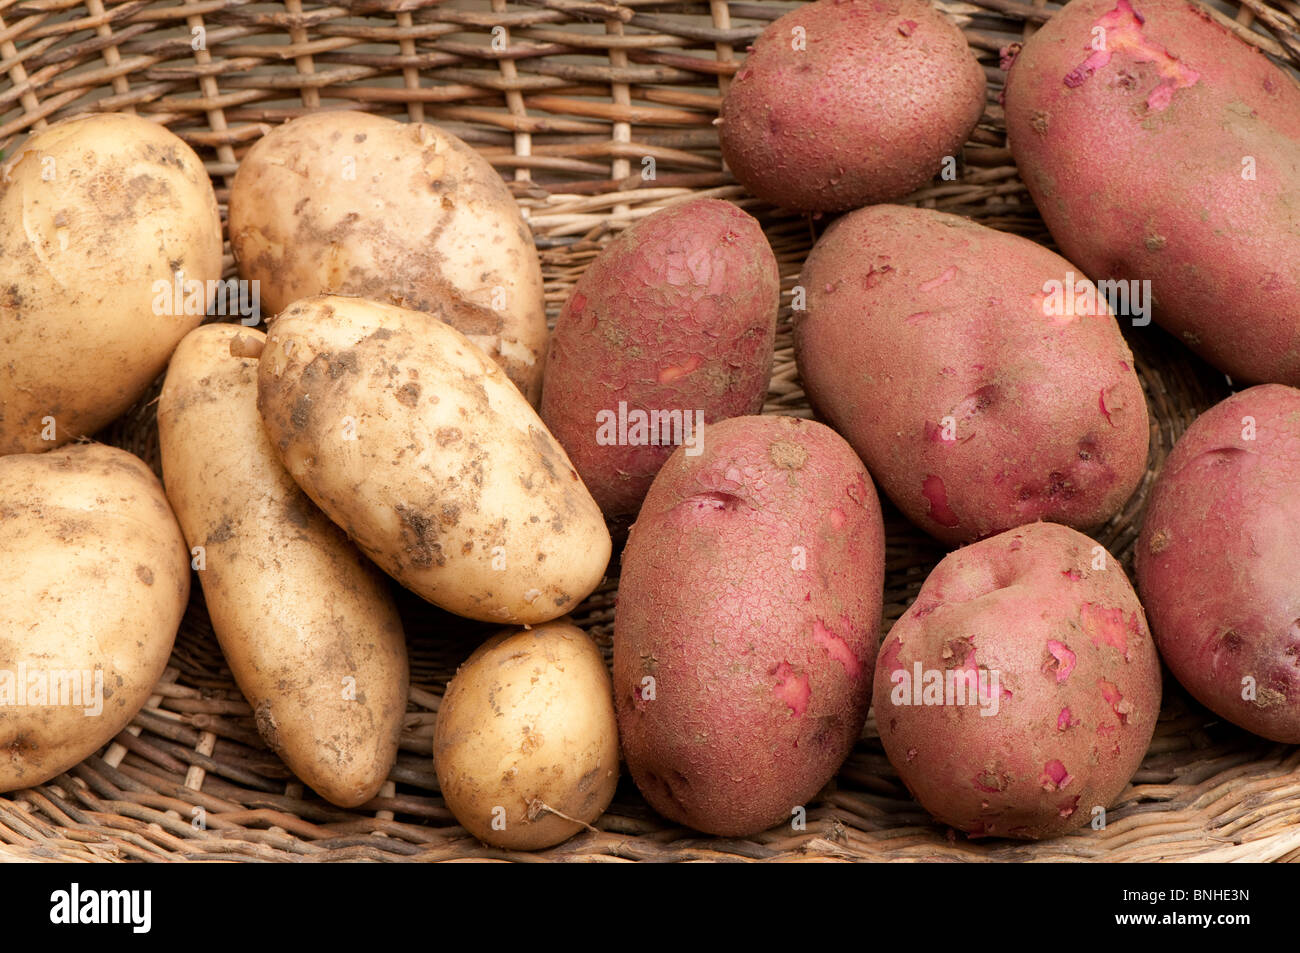 Freshly harvested 'Arran Pilot' (white) and 'Red Duke of York' (red) first early potatoes in a wicker basket Stock Photo